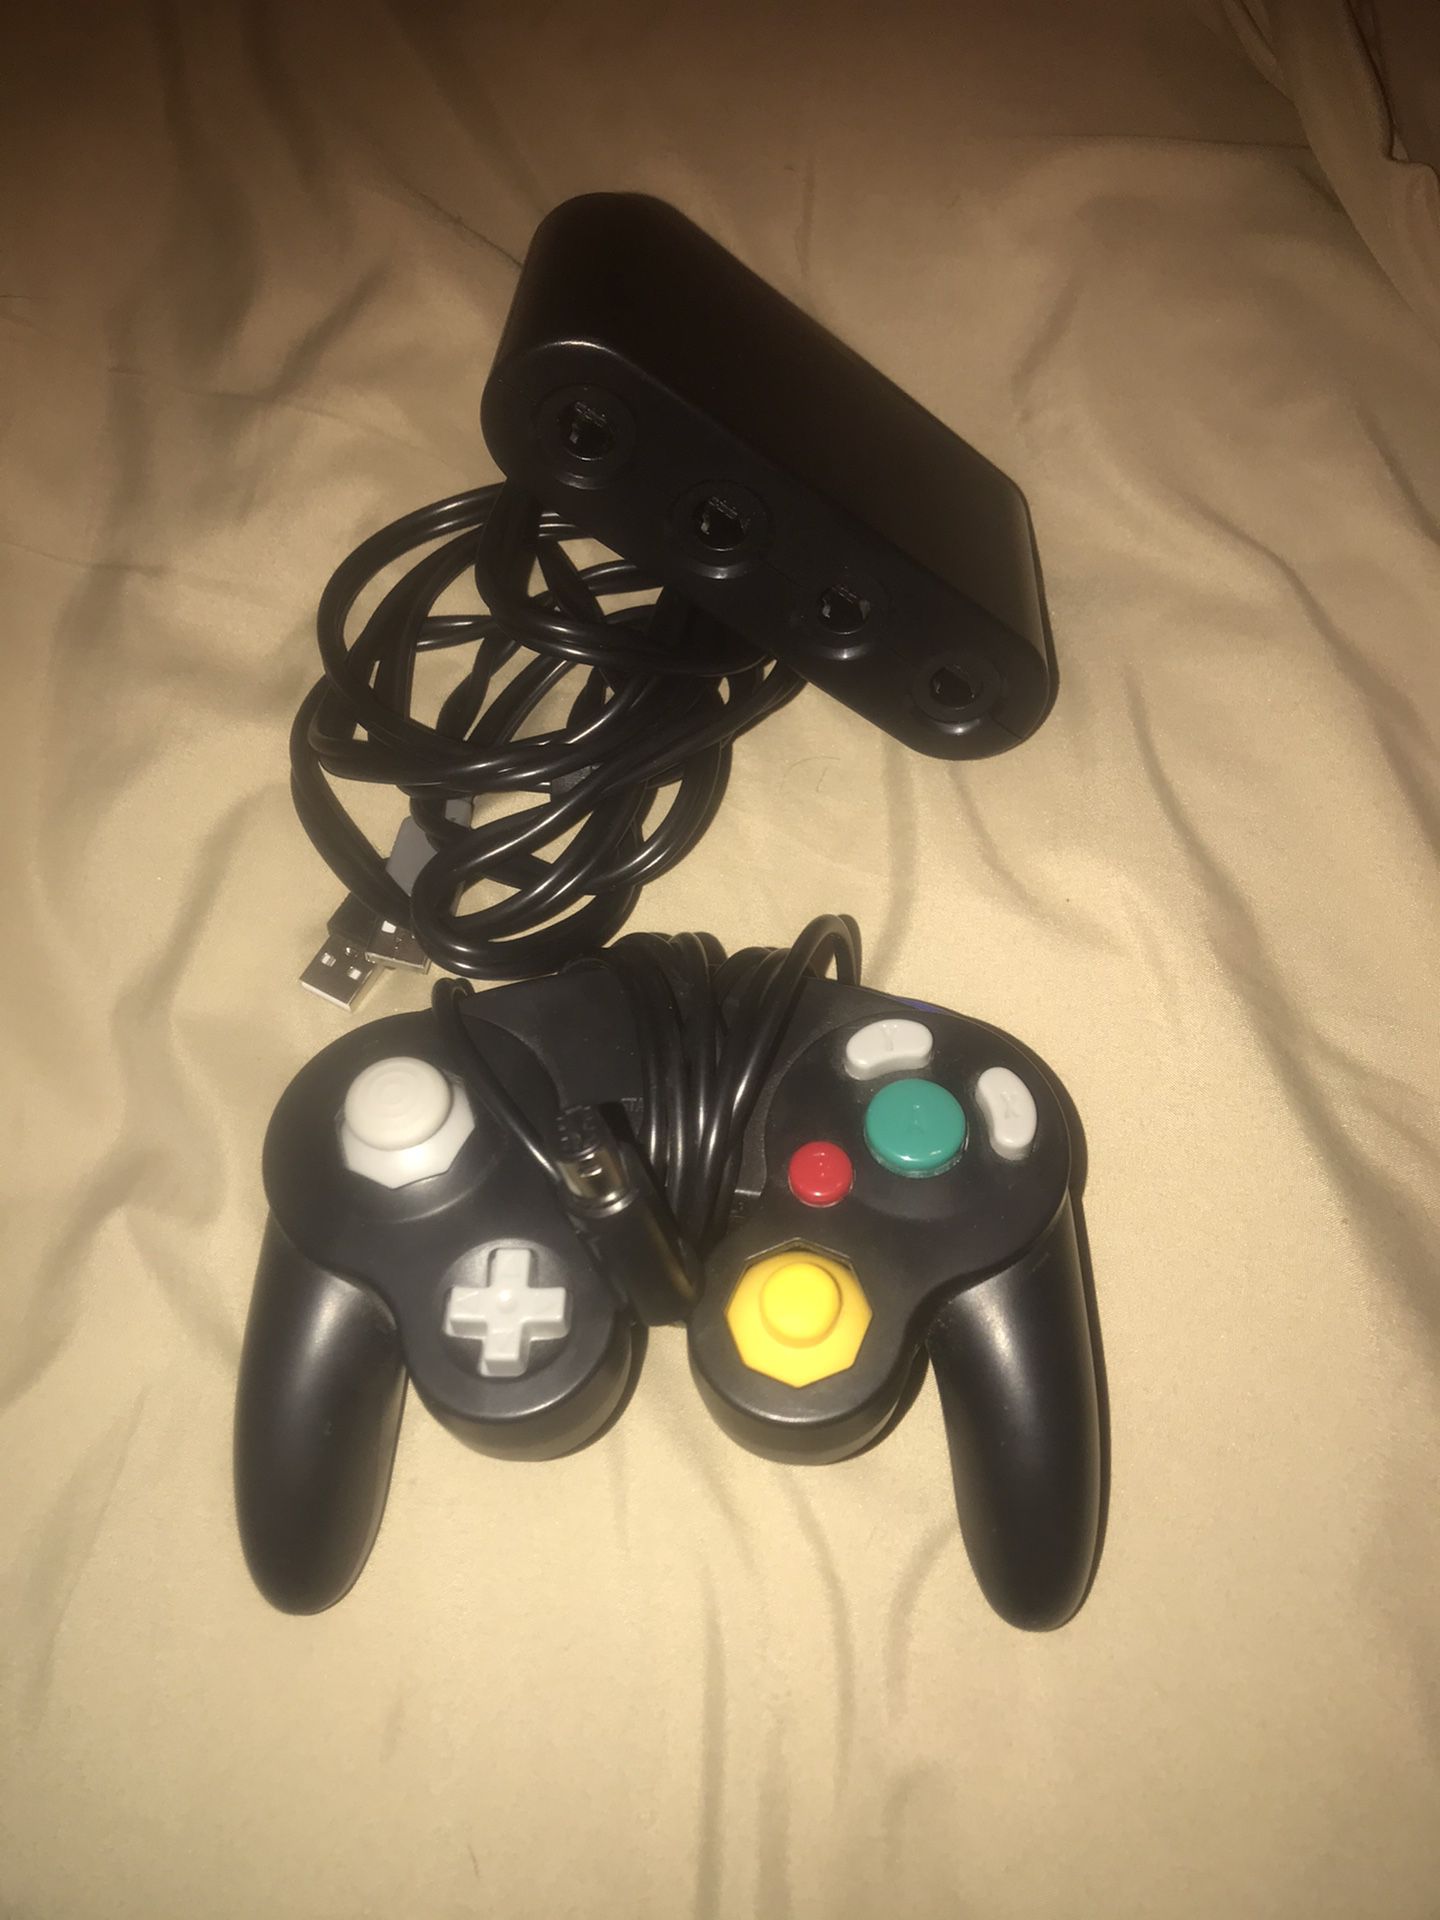 Nintendo switch game cube controller and adapter